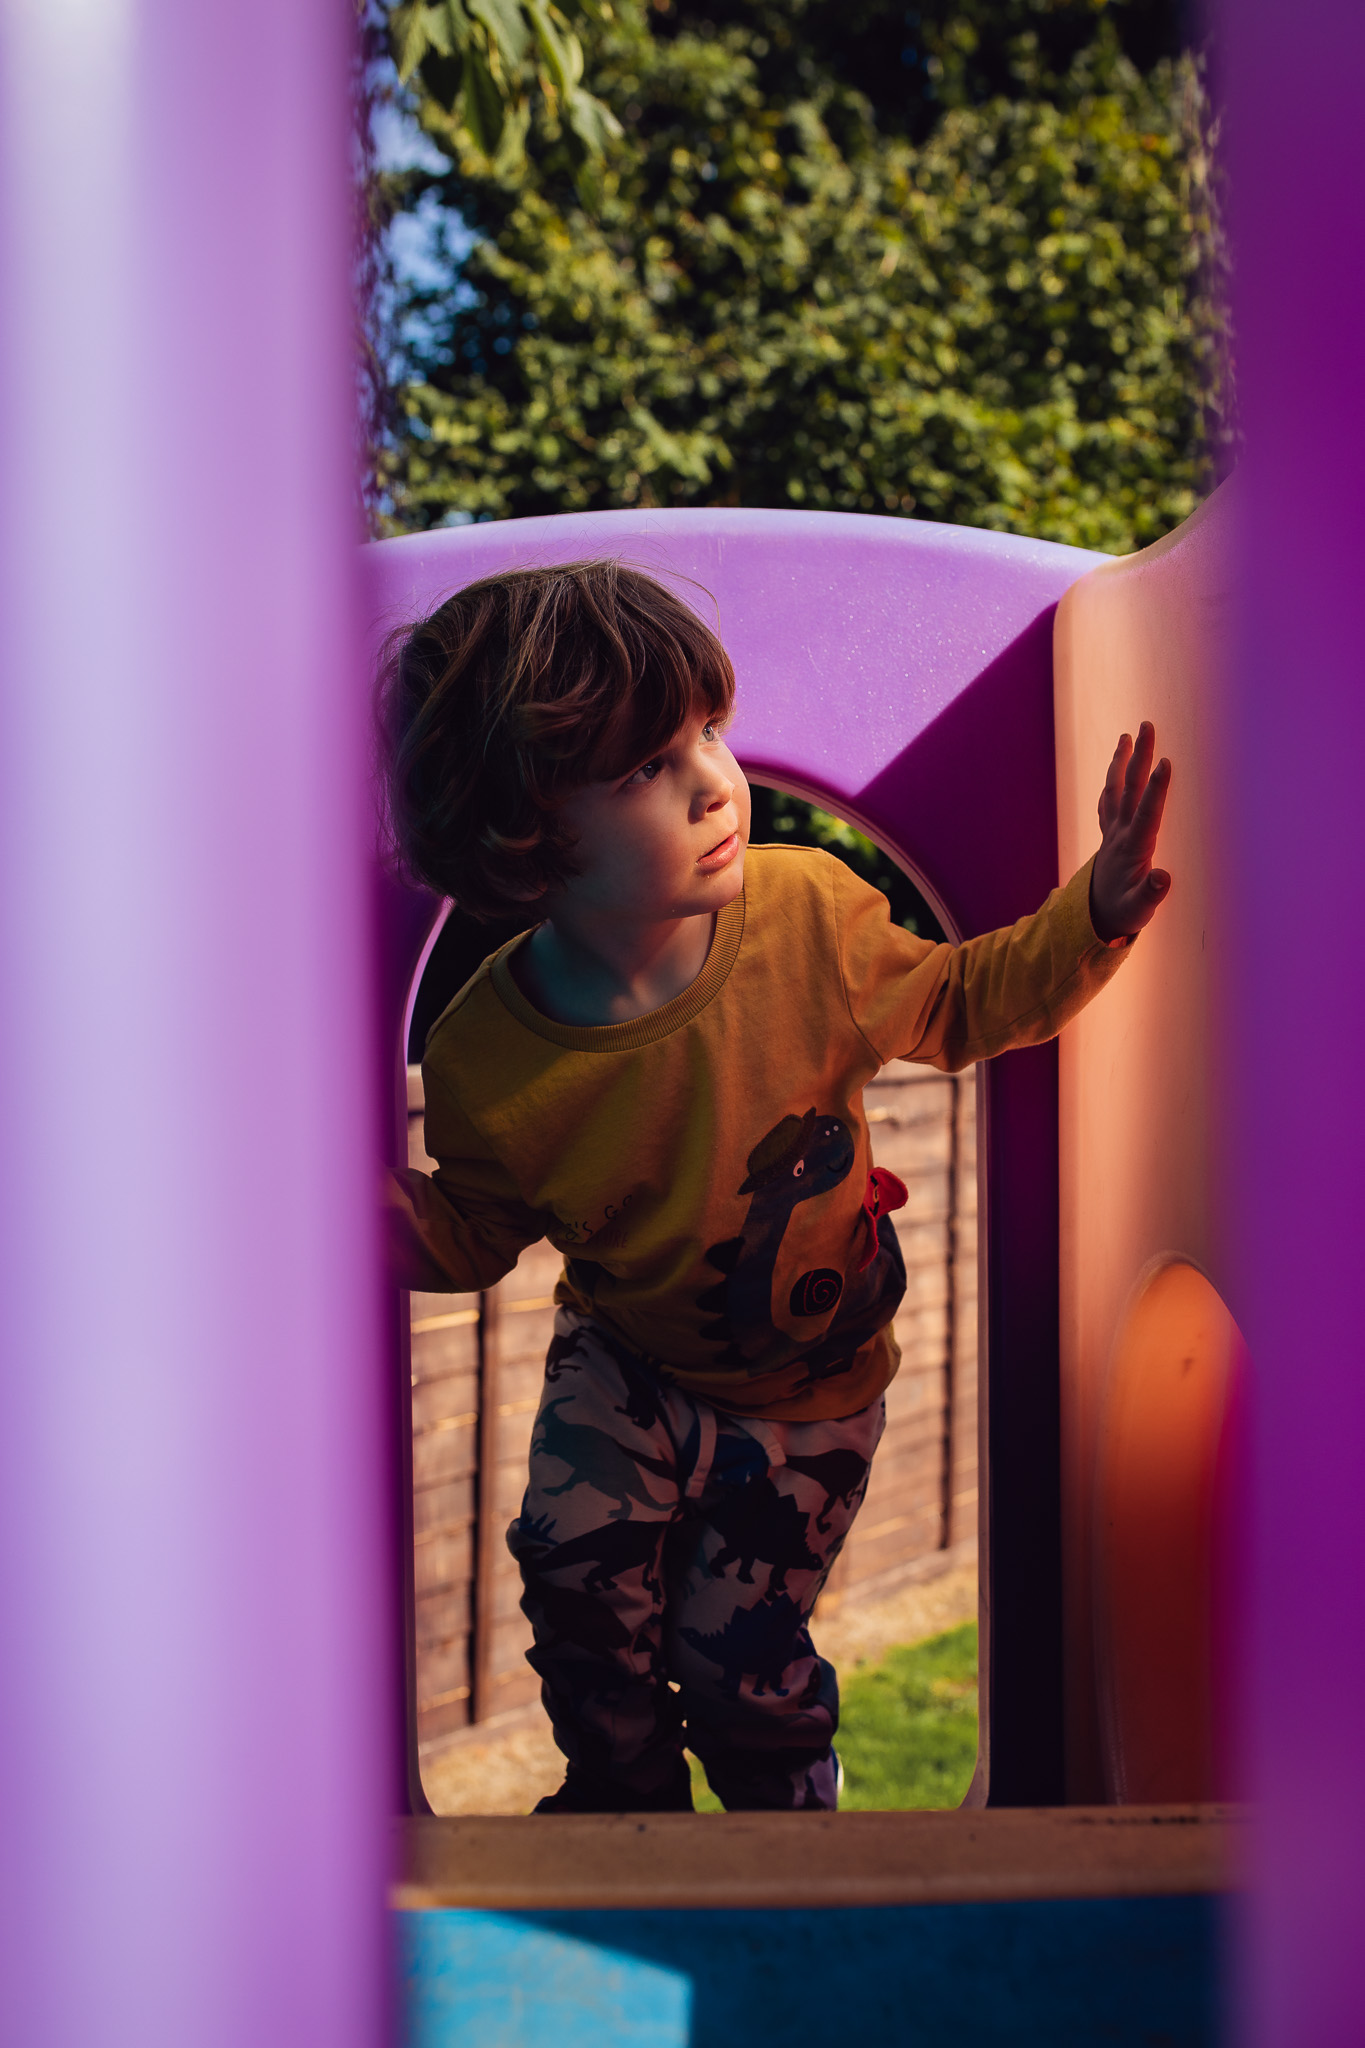 Leo climbing through a purple climbing frame during a family photo session